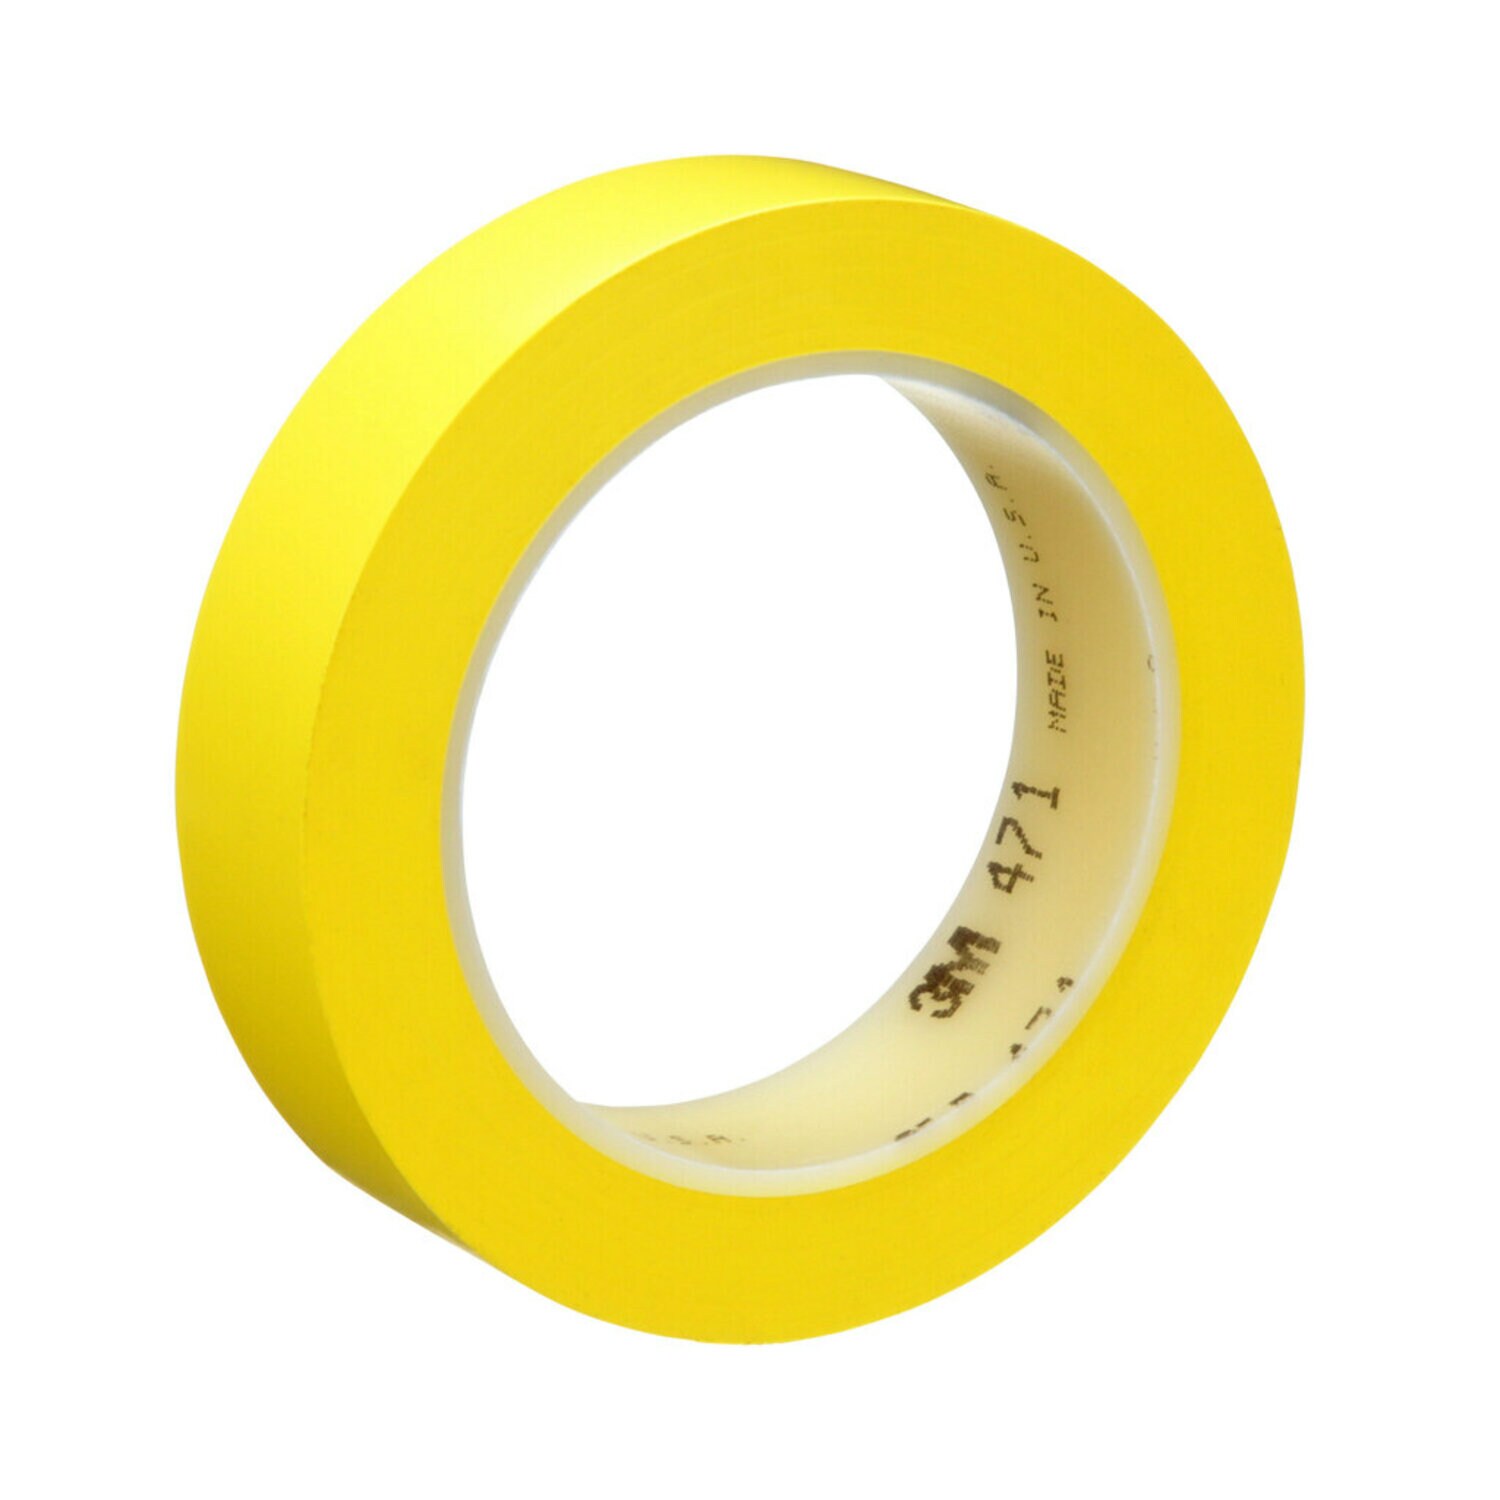 7100044642 - 3M Vinyl Tape 471, Yellow, 1 in x 36 yd, 5.2 mil, 36 rolls per case,
Individually Wrapped Conveniently Packaged